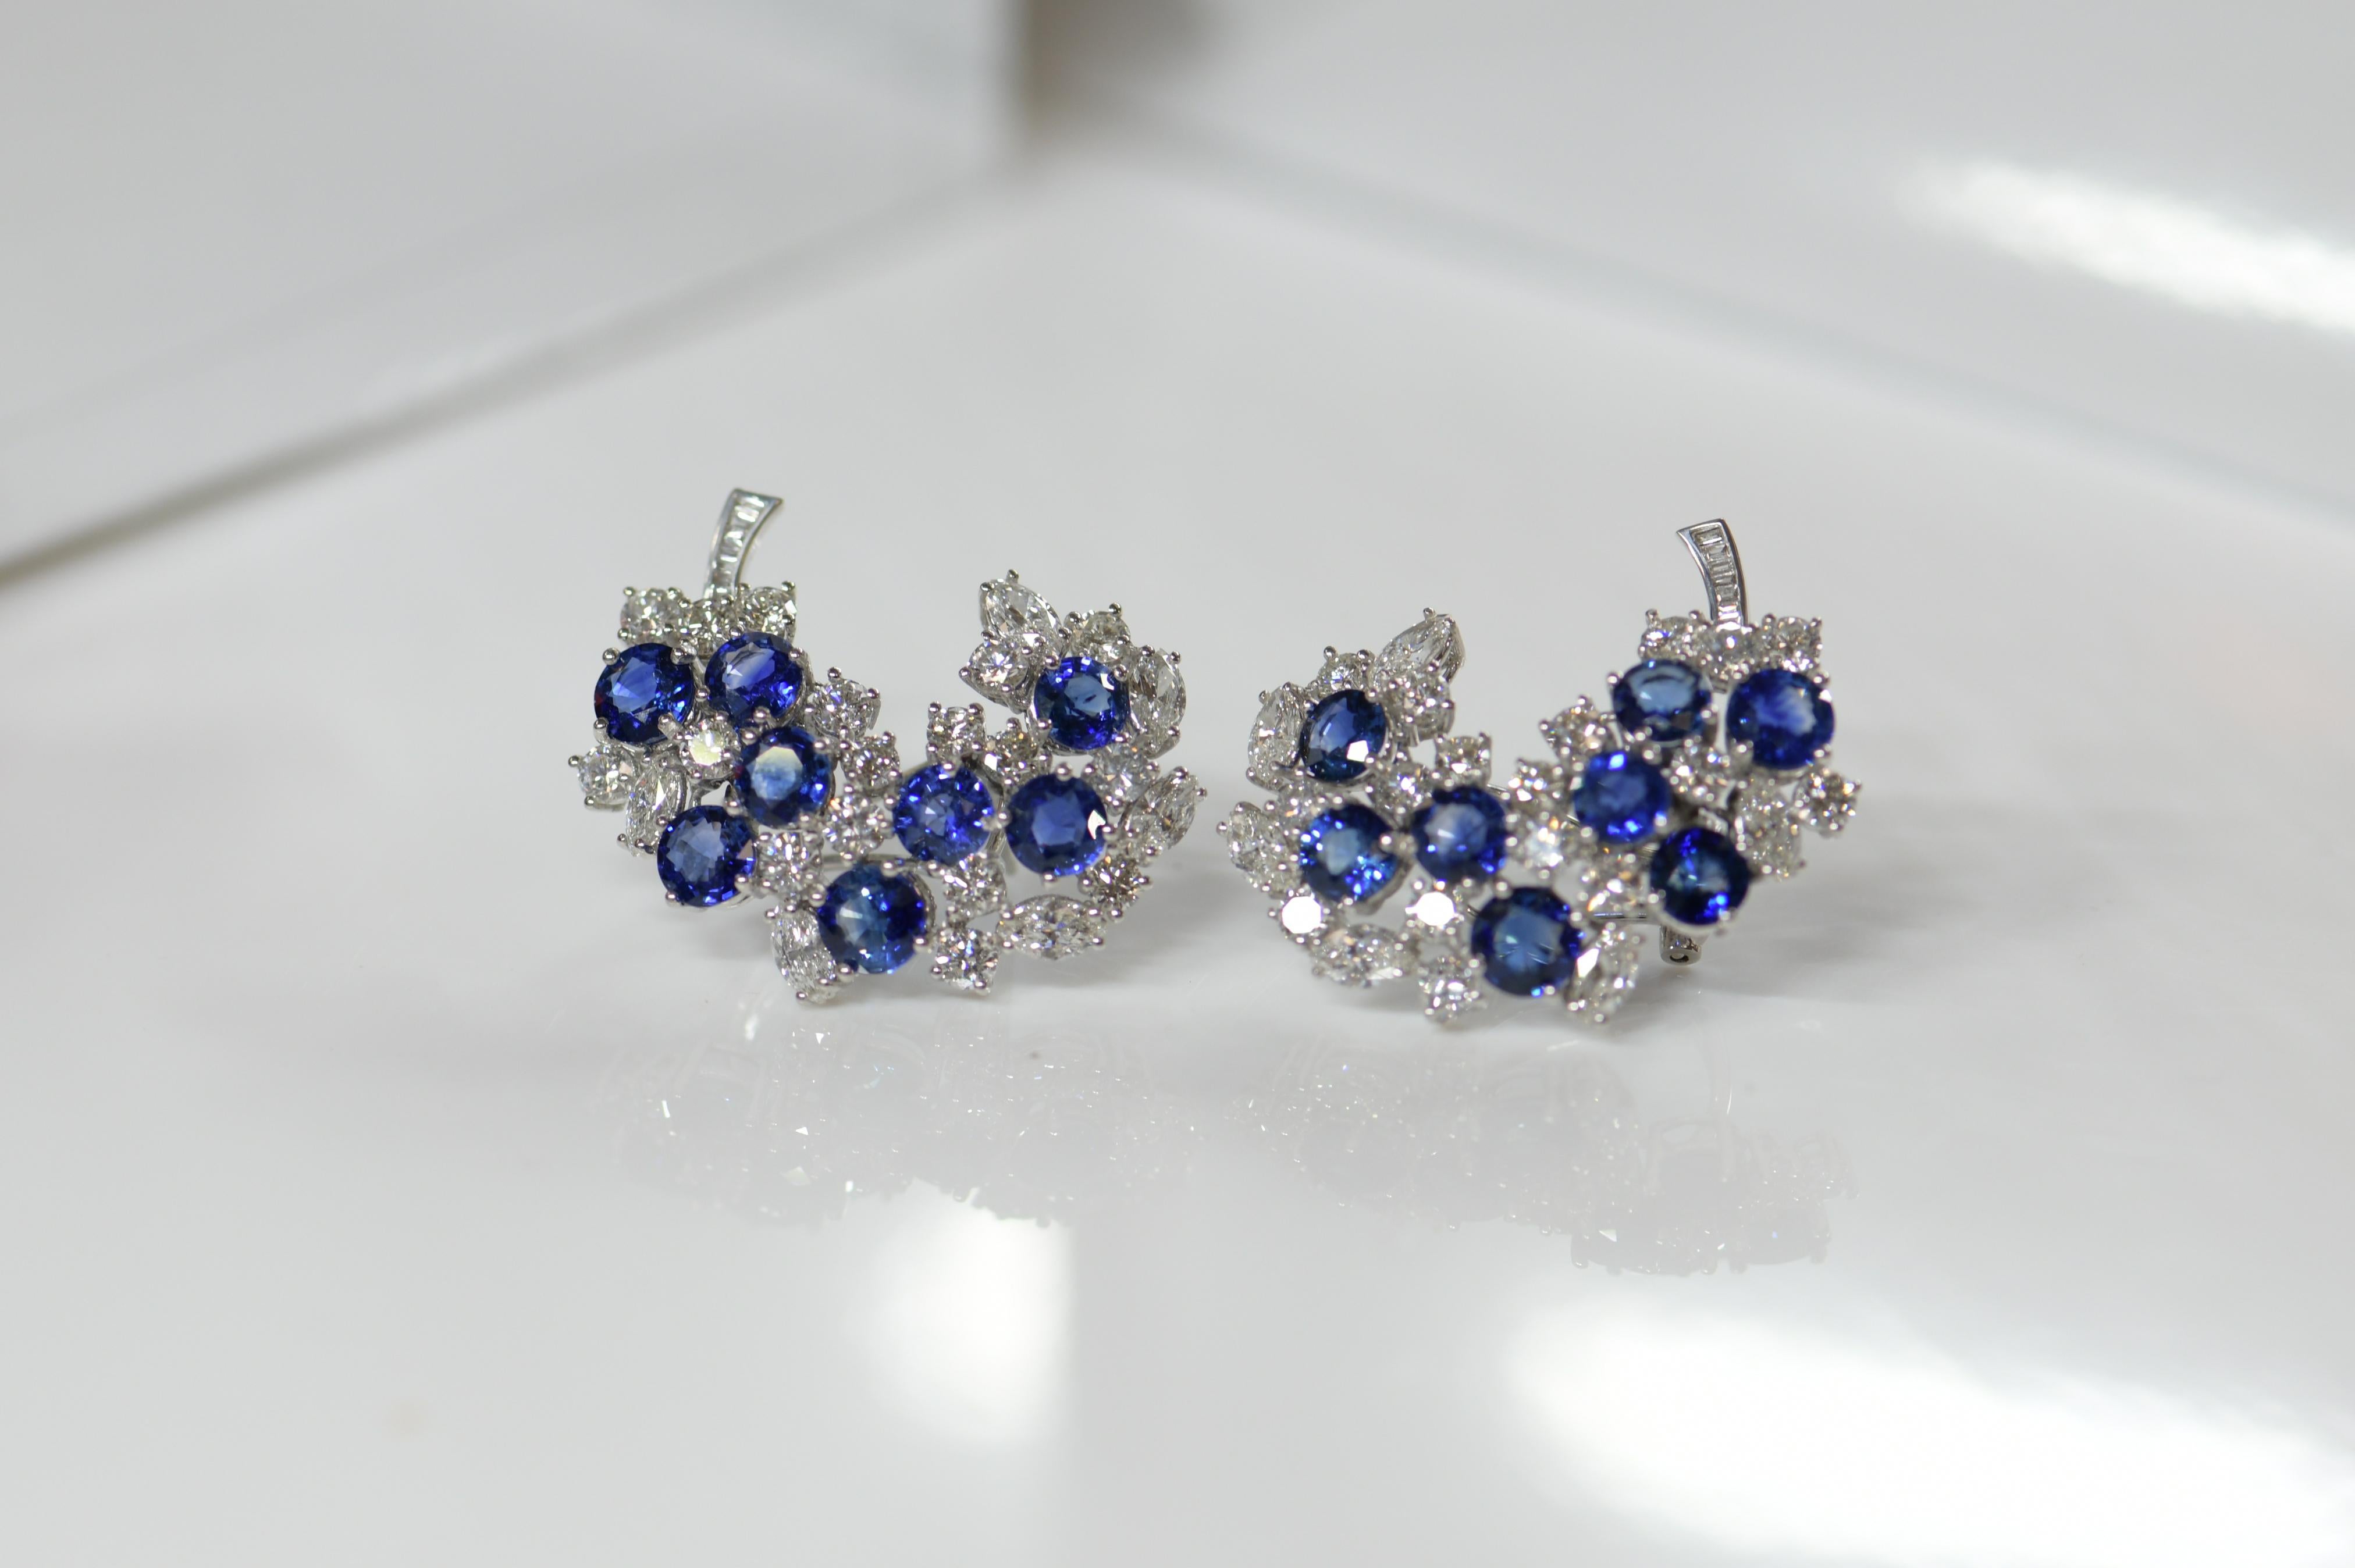 This is high-end, top quality craftsmanship and design. The sapphires are a rich royal blue with excellent clarity. The different diamond shapes of Round, marquise and baguette compliment each other and the sapphires perfectly. The variety adds